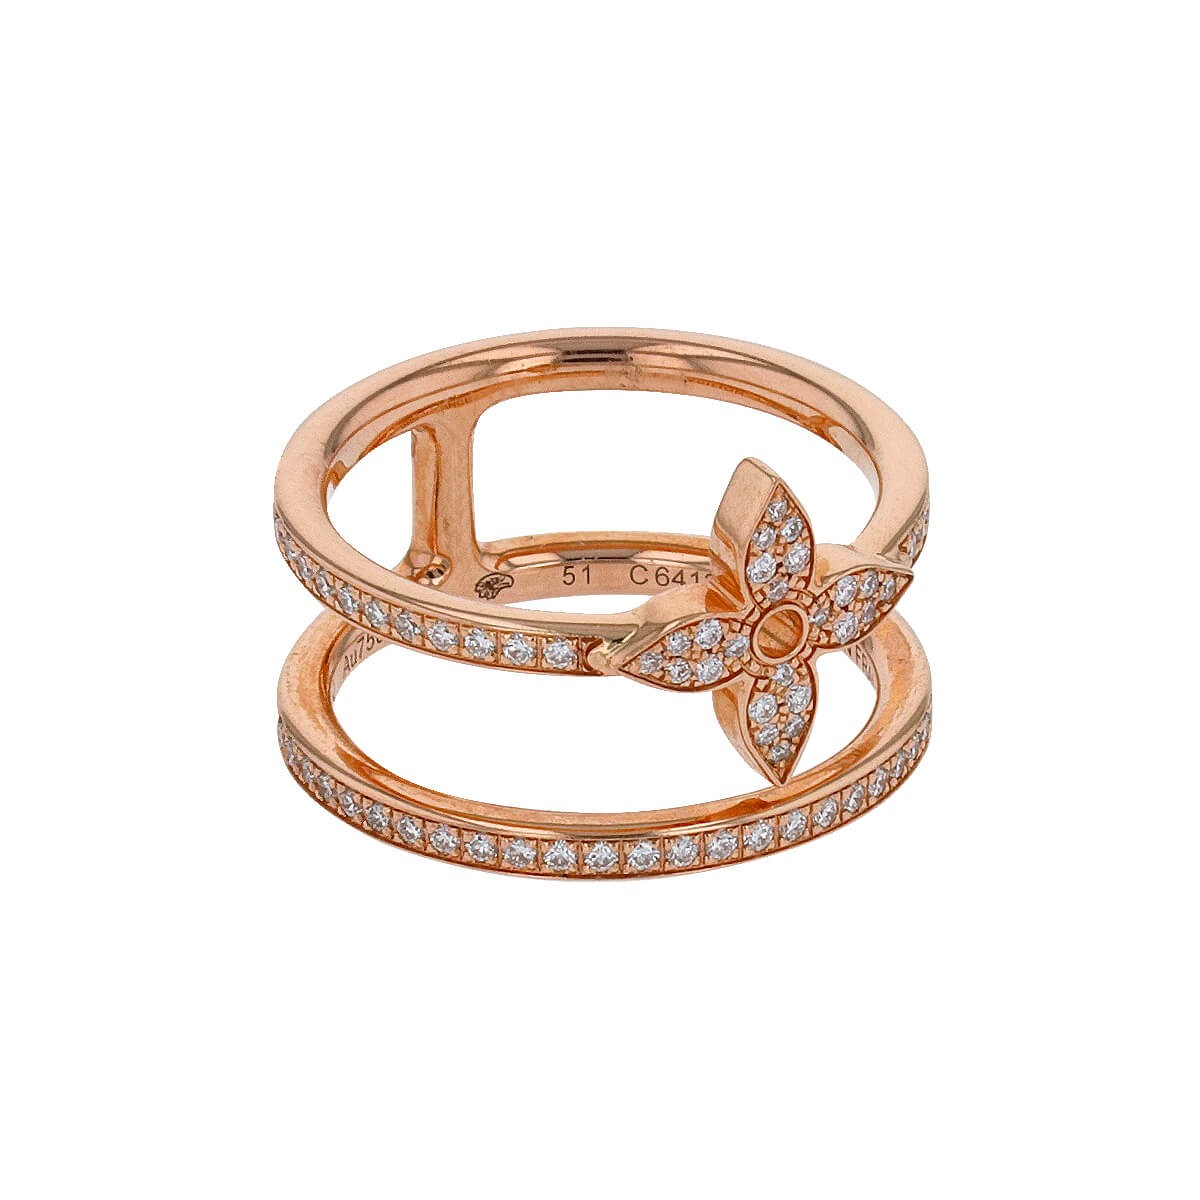 Idylle Blossom Two-Row Bracelet, Pink Gold And Diamonds - Jewelry